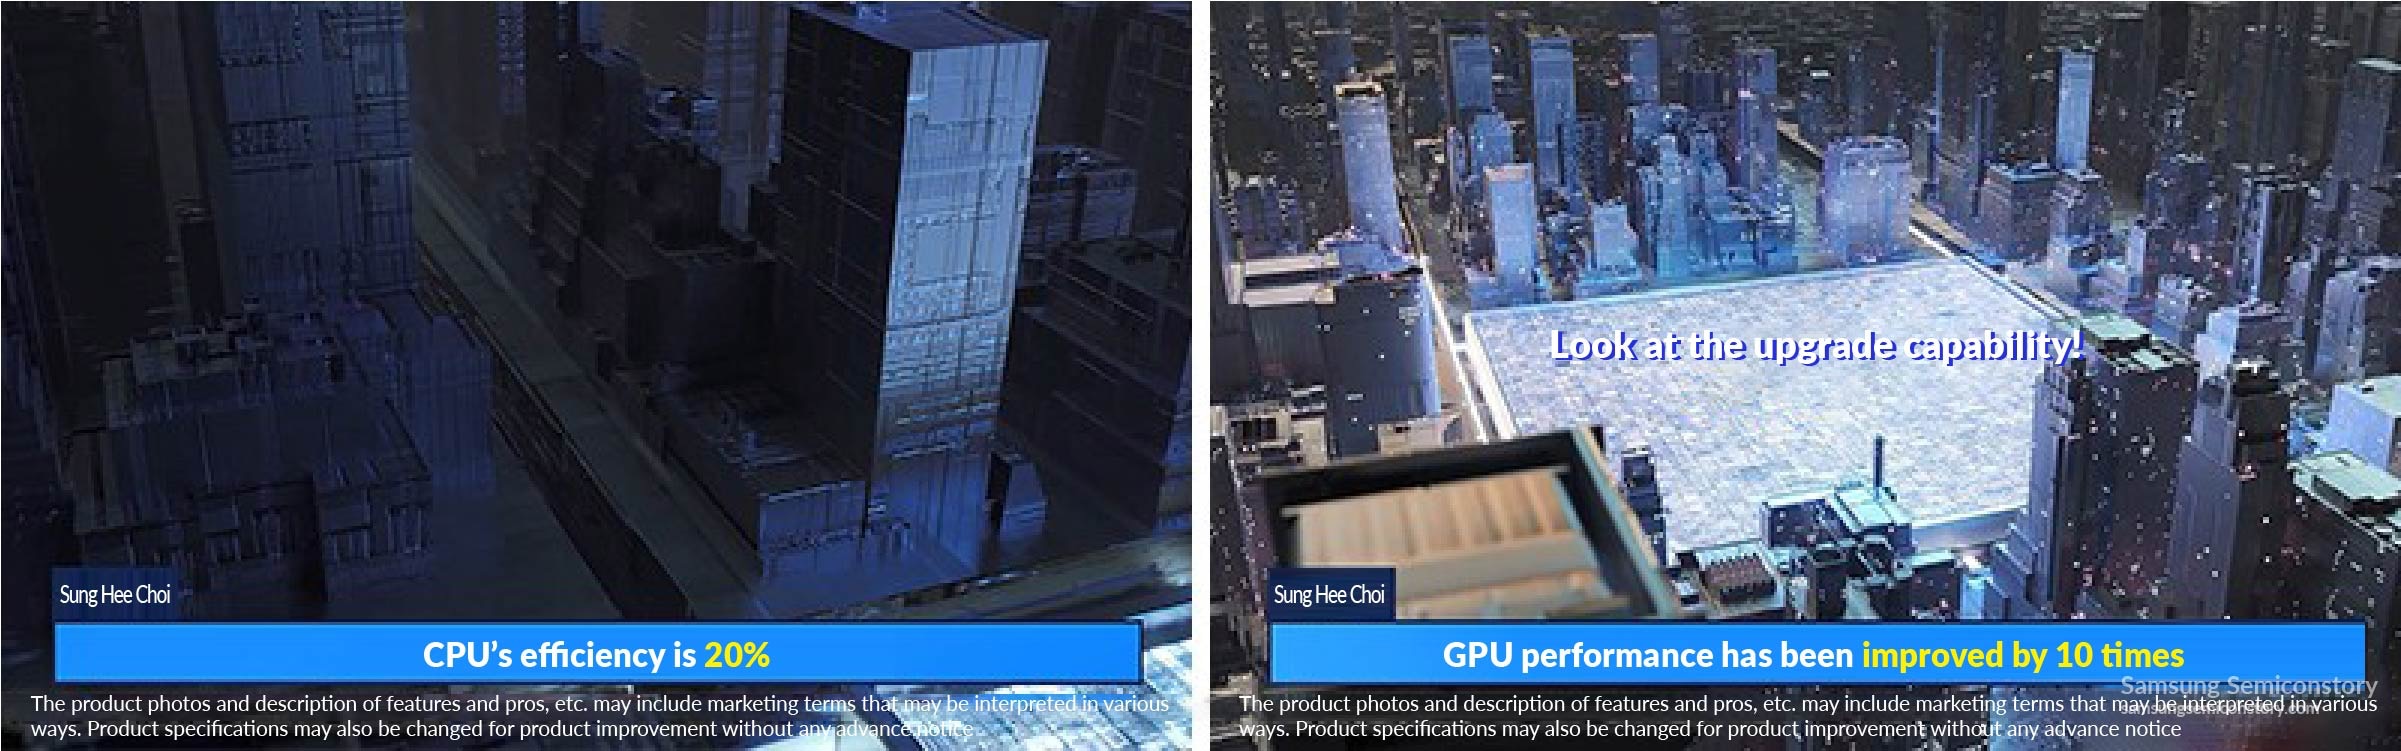 illustrating the Exynos W920 with 20% CPU performance and 10x GPU performance improvement compared to its predecessor